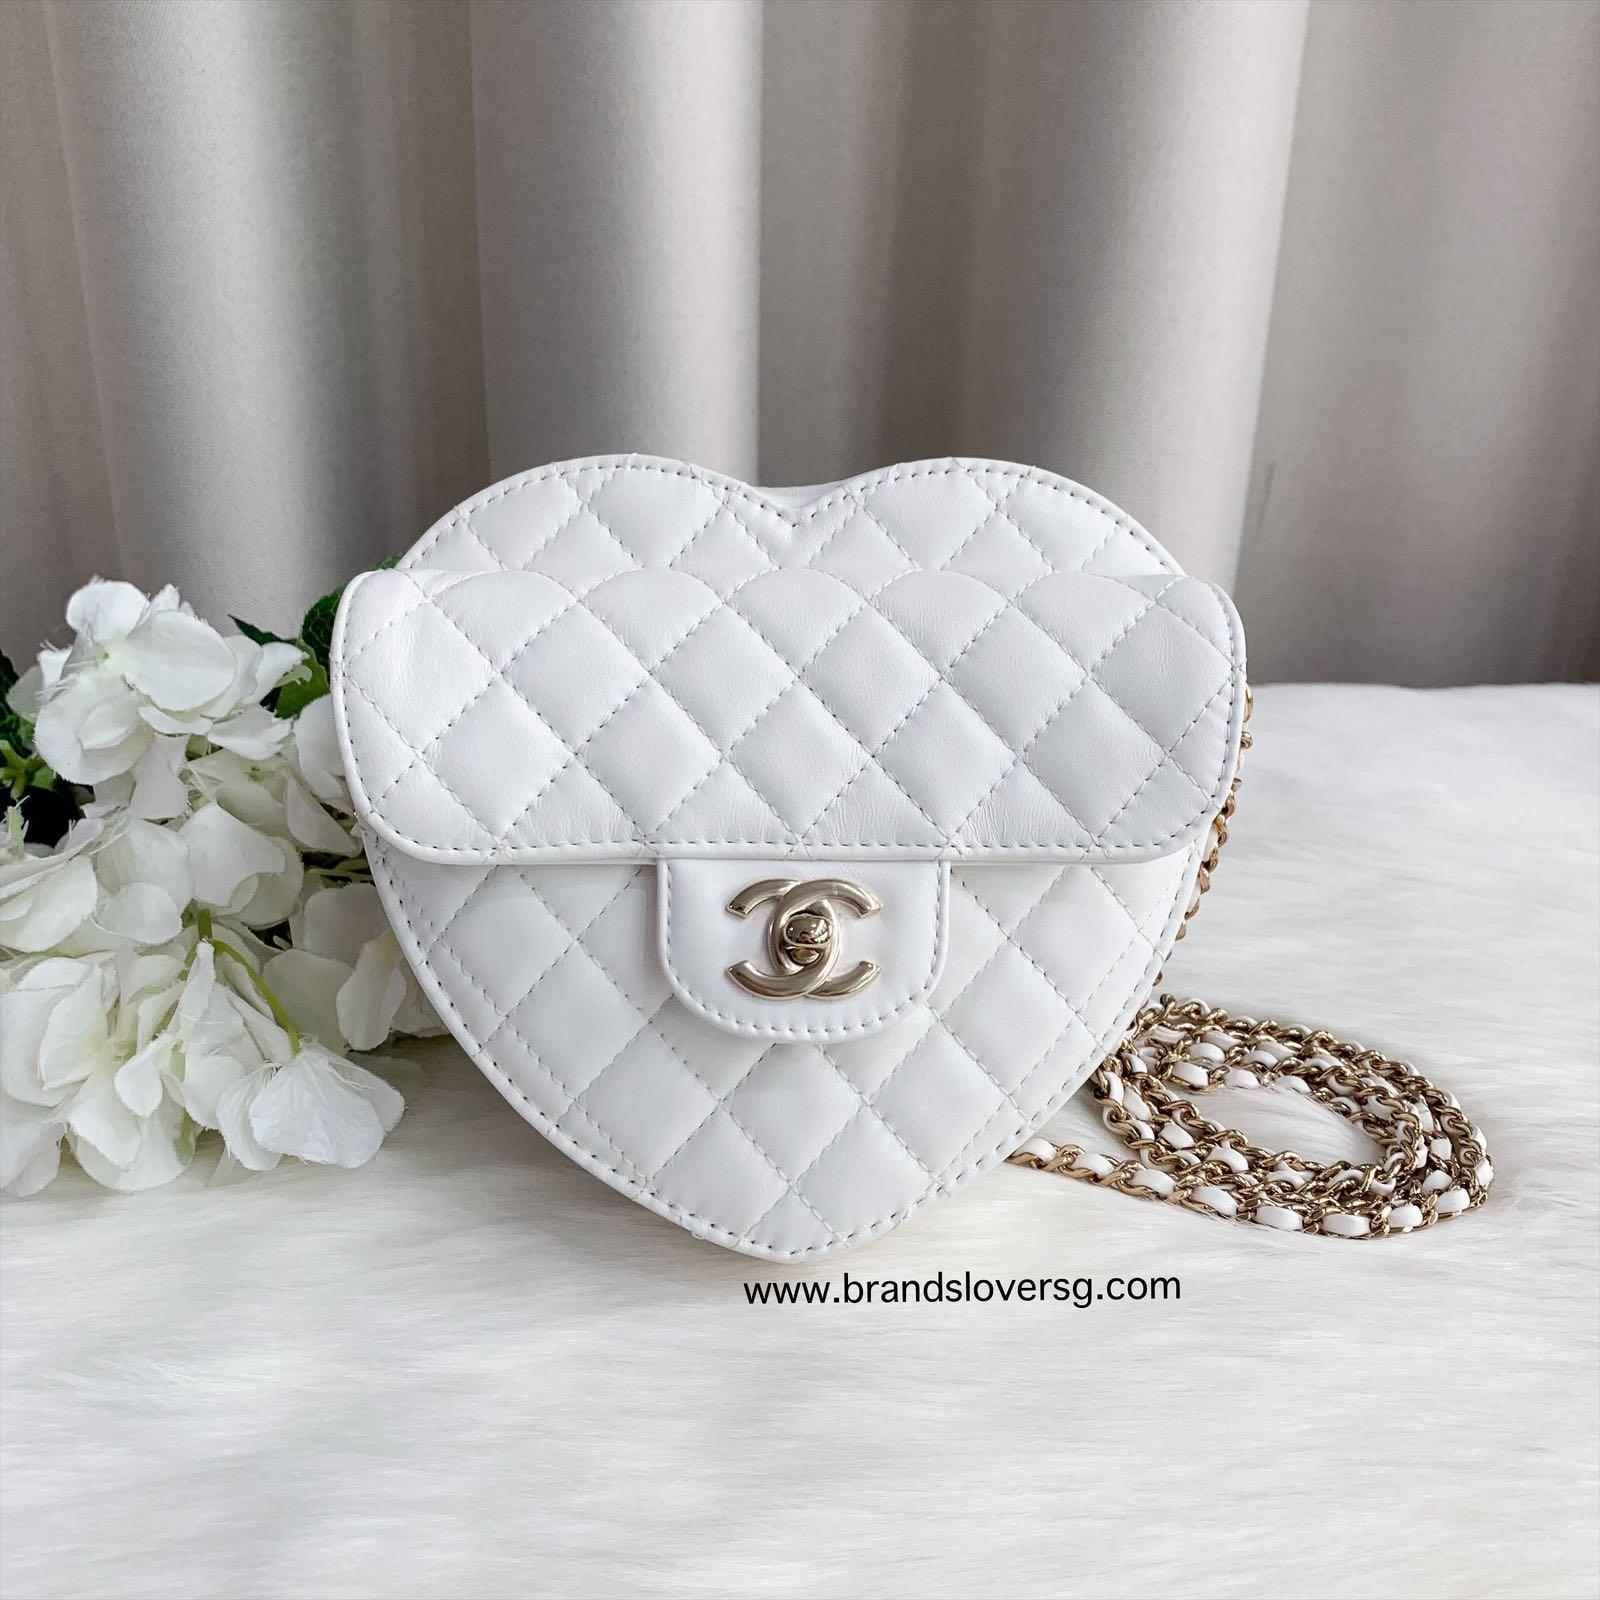 ✖️SOLD✖️ Chanel 22S Large Heart Bag in White Lambskin LGHW